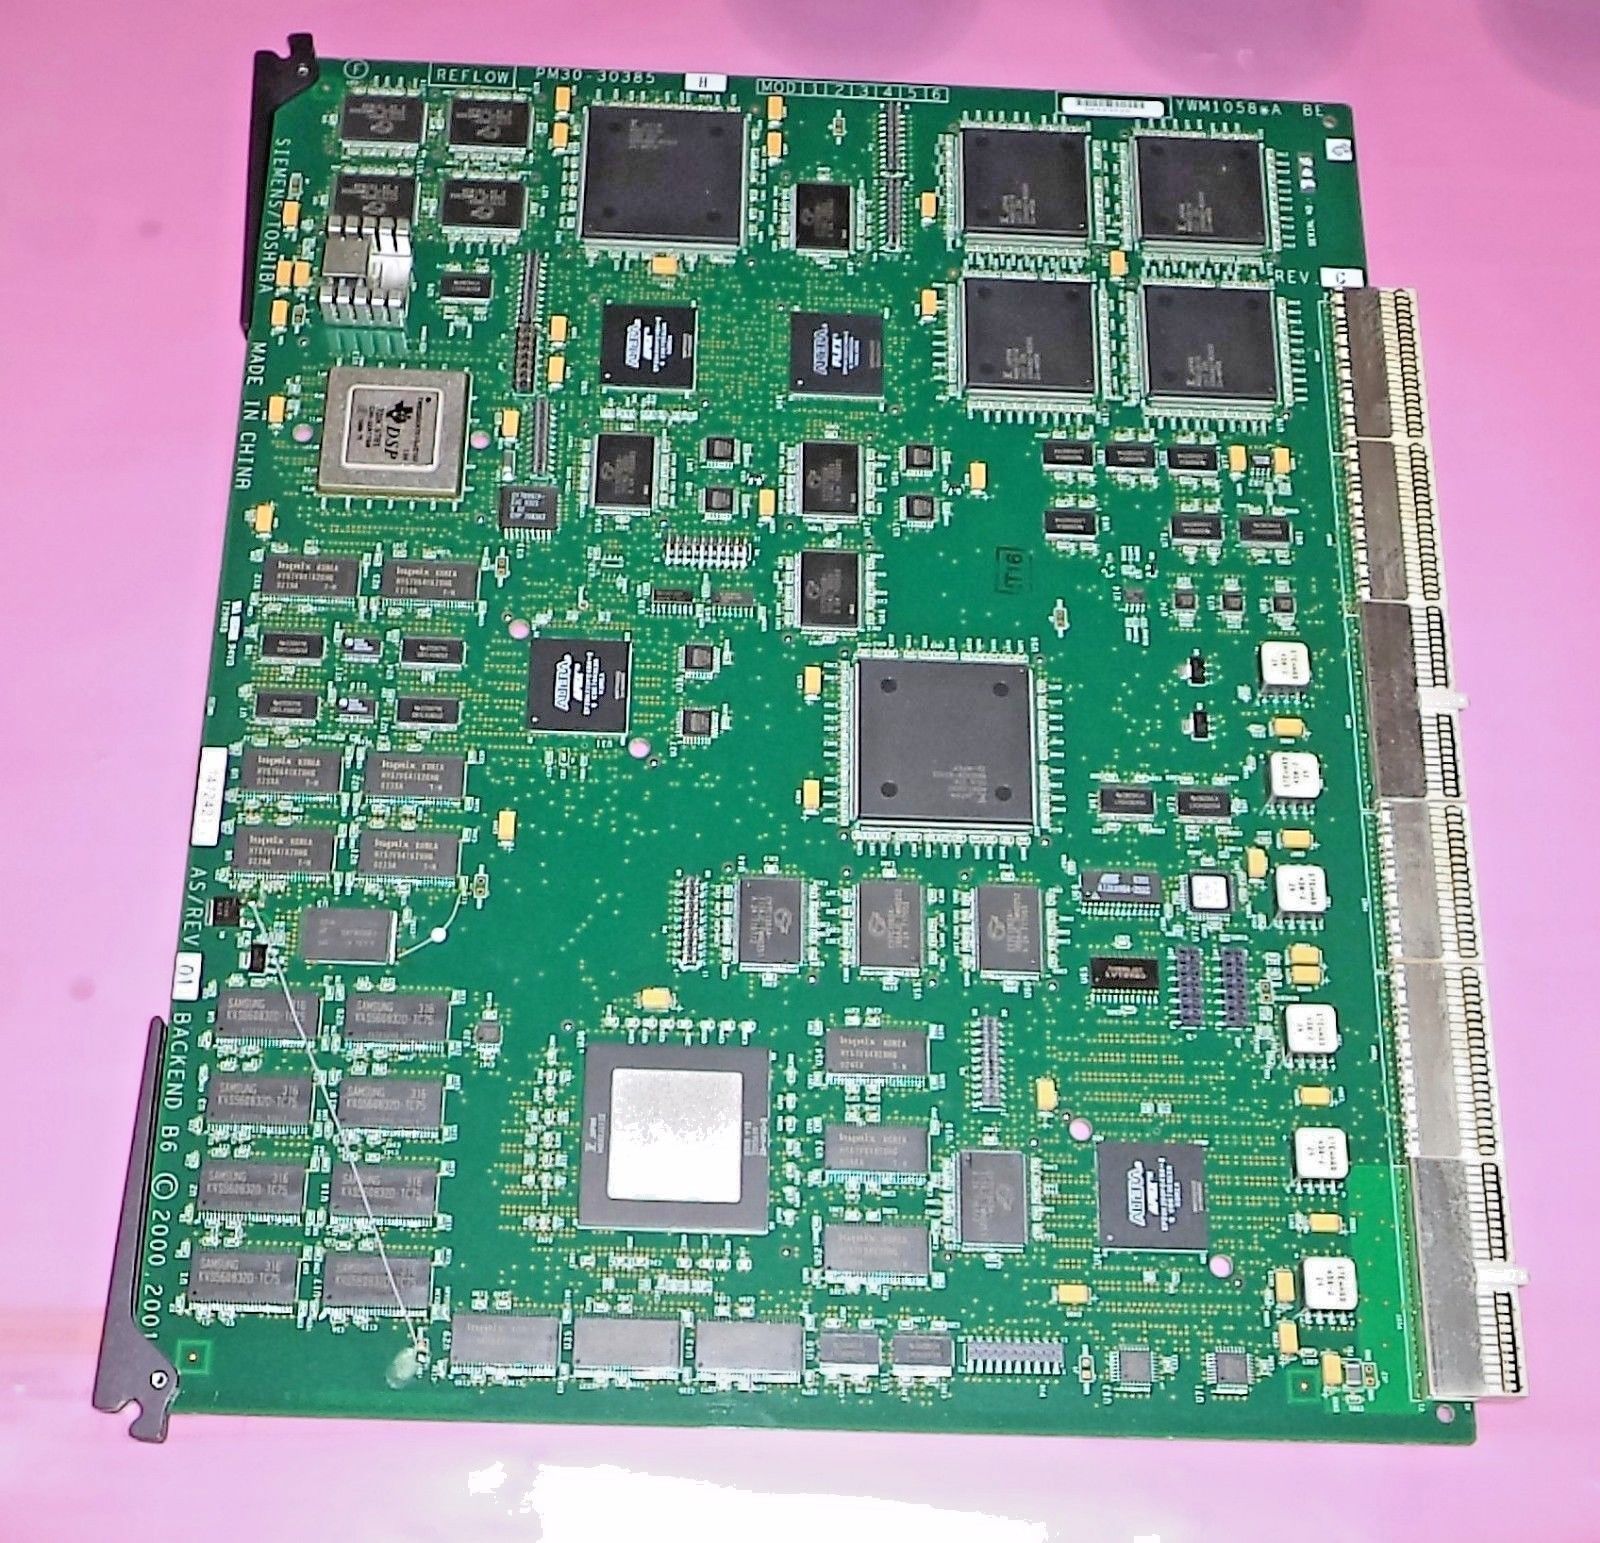 Siemens Antares Ultrasound Backend B6 Board (PN: 07472421) DIAGNOSTIC ULTRASOUND MACHINES FOR SALE